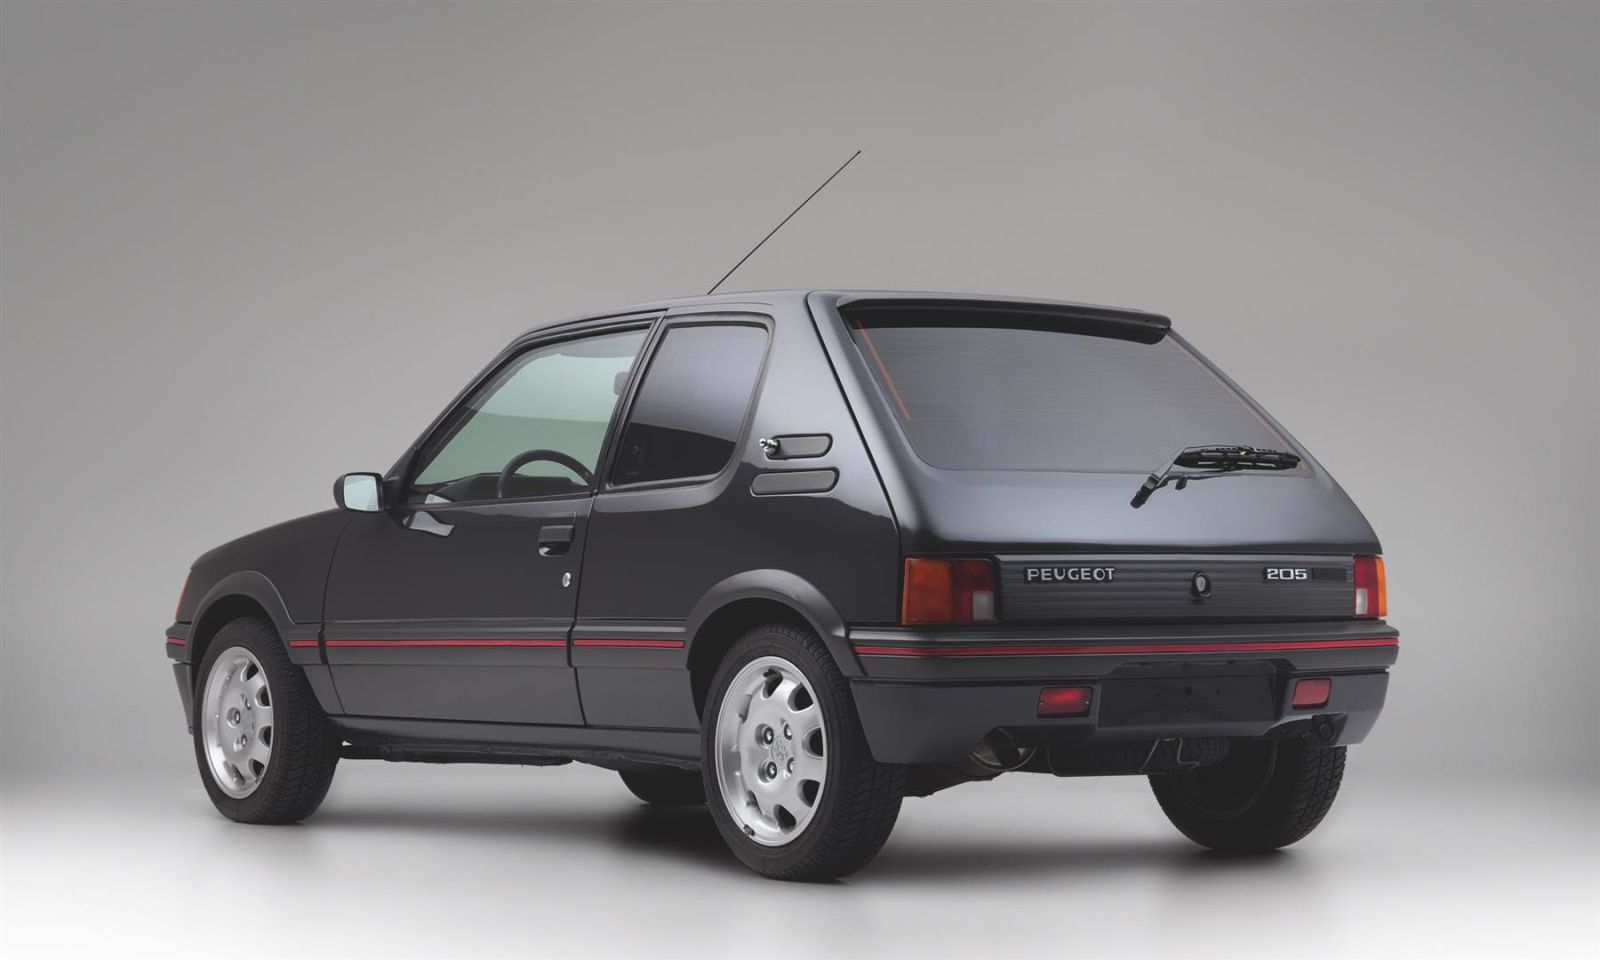 Illustration for article titled Heres an interesting car. Armoured Peugeot 205.